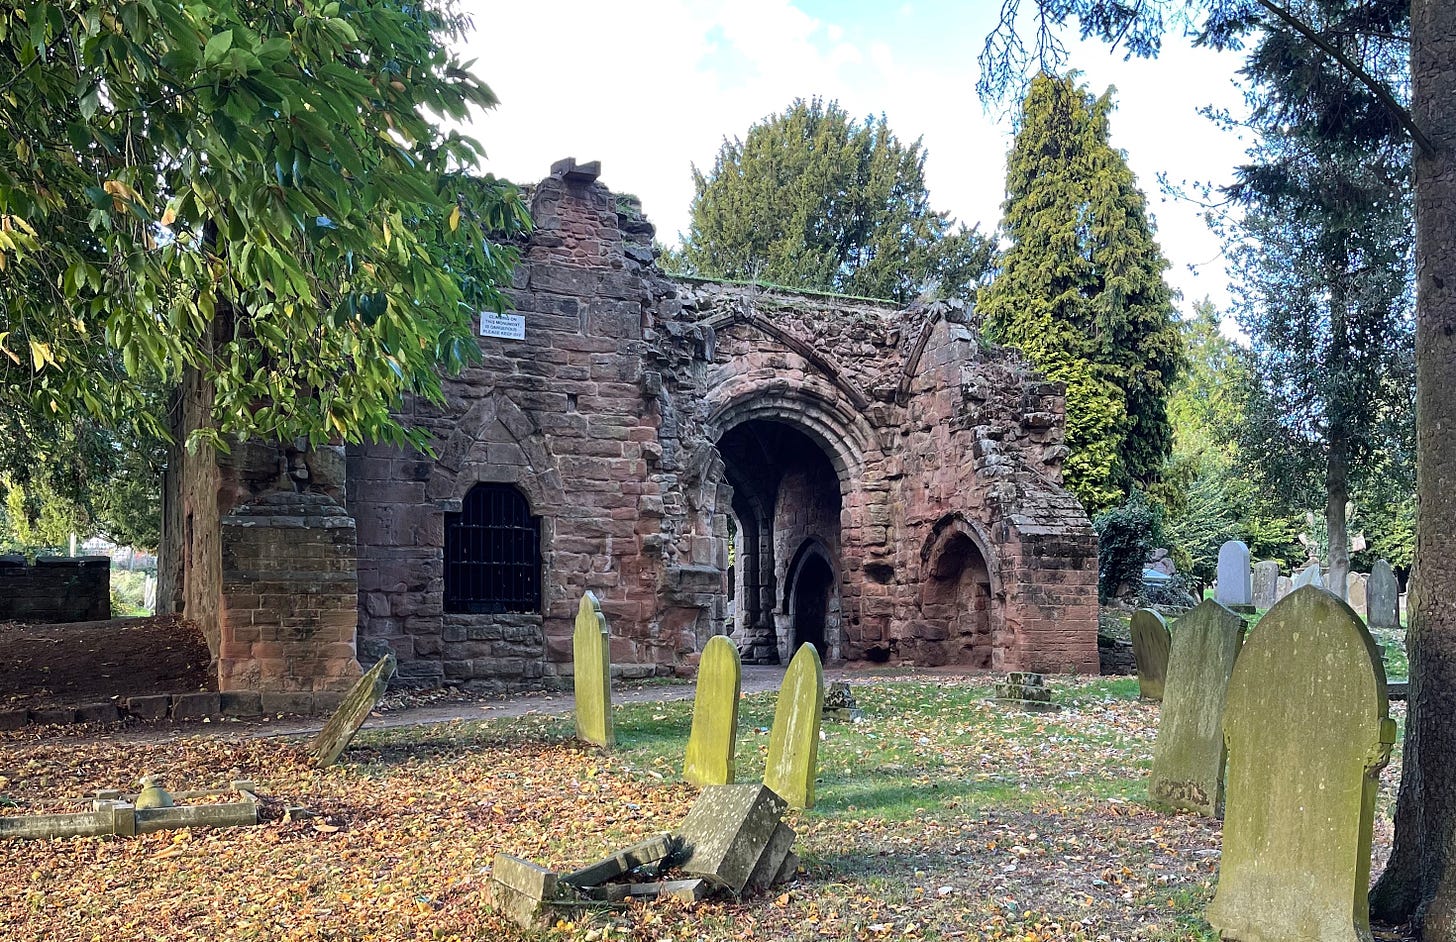 The Gatehouse of St Mary’s Priory, Kenilworth